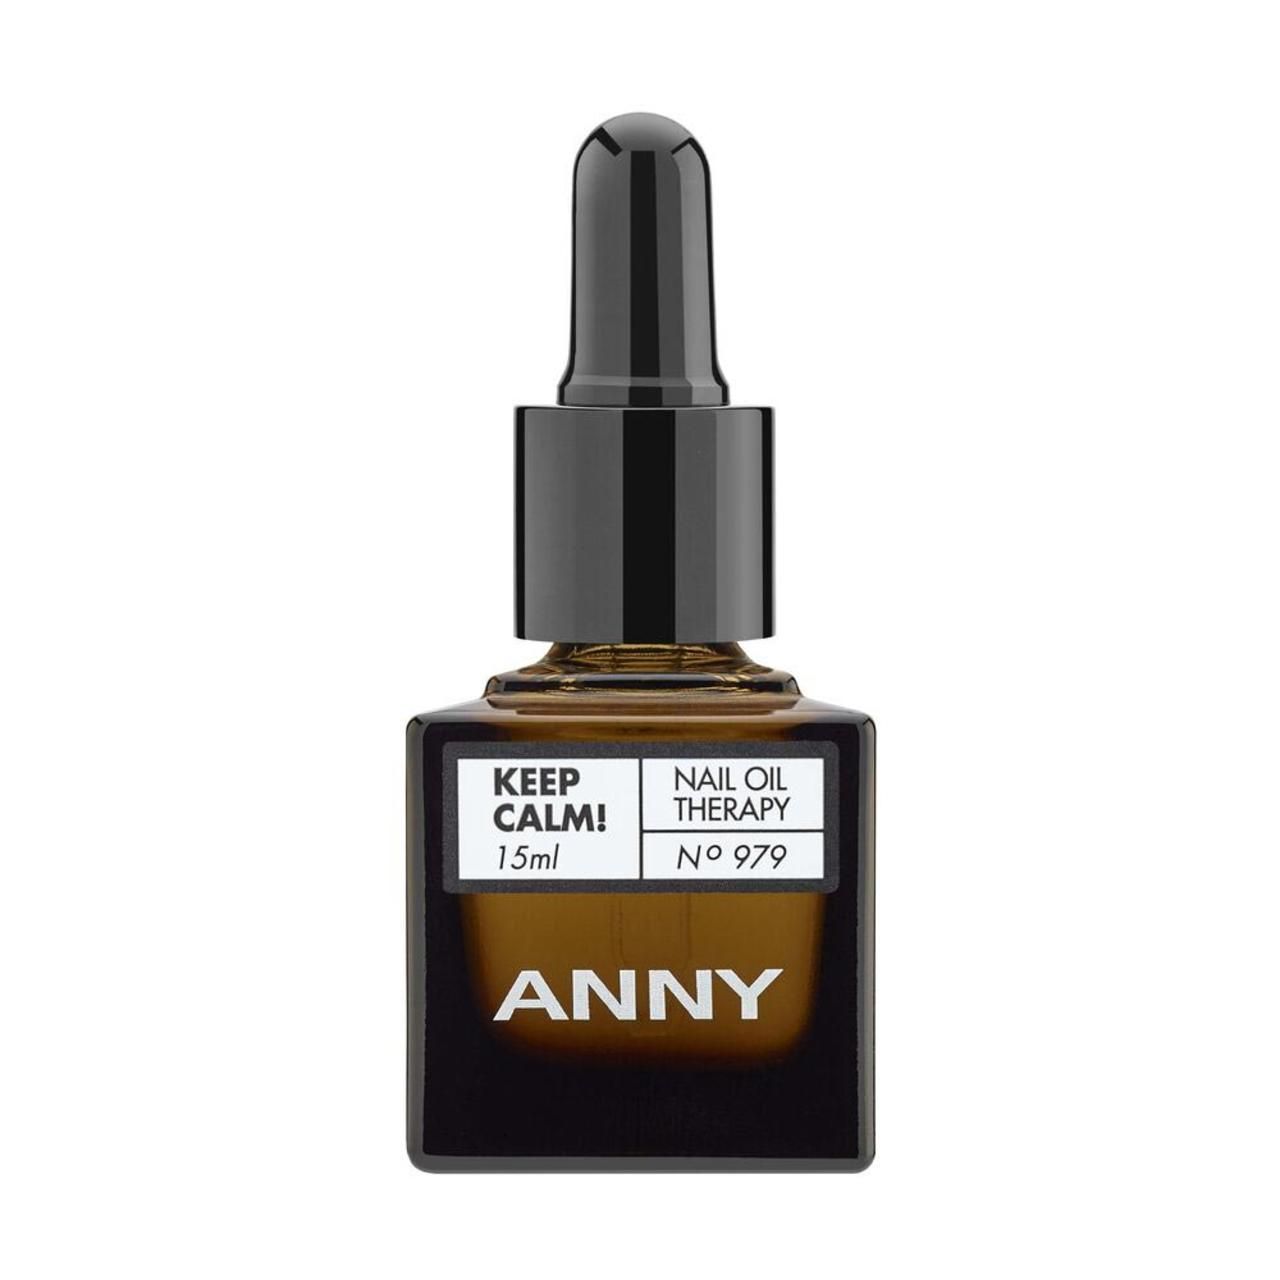 Anny, Keep Calm! Nail Oil Therapy